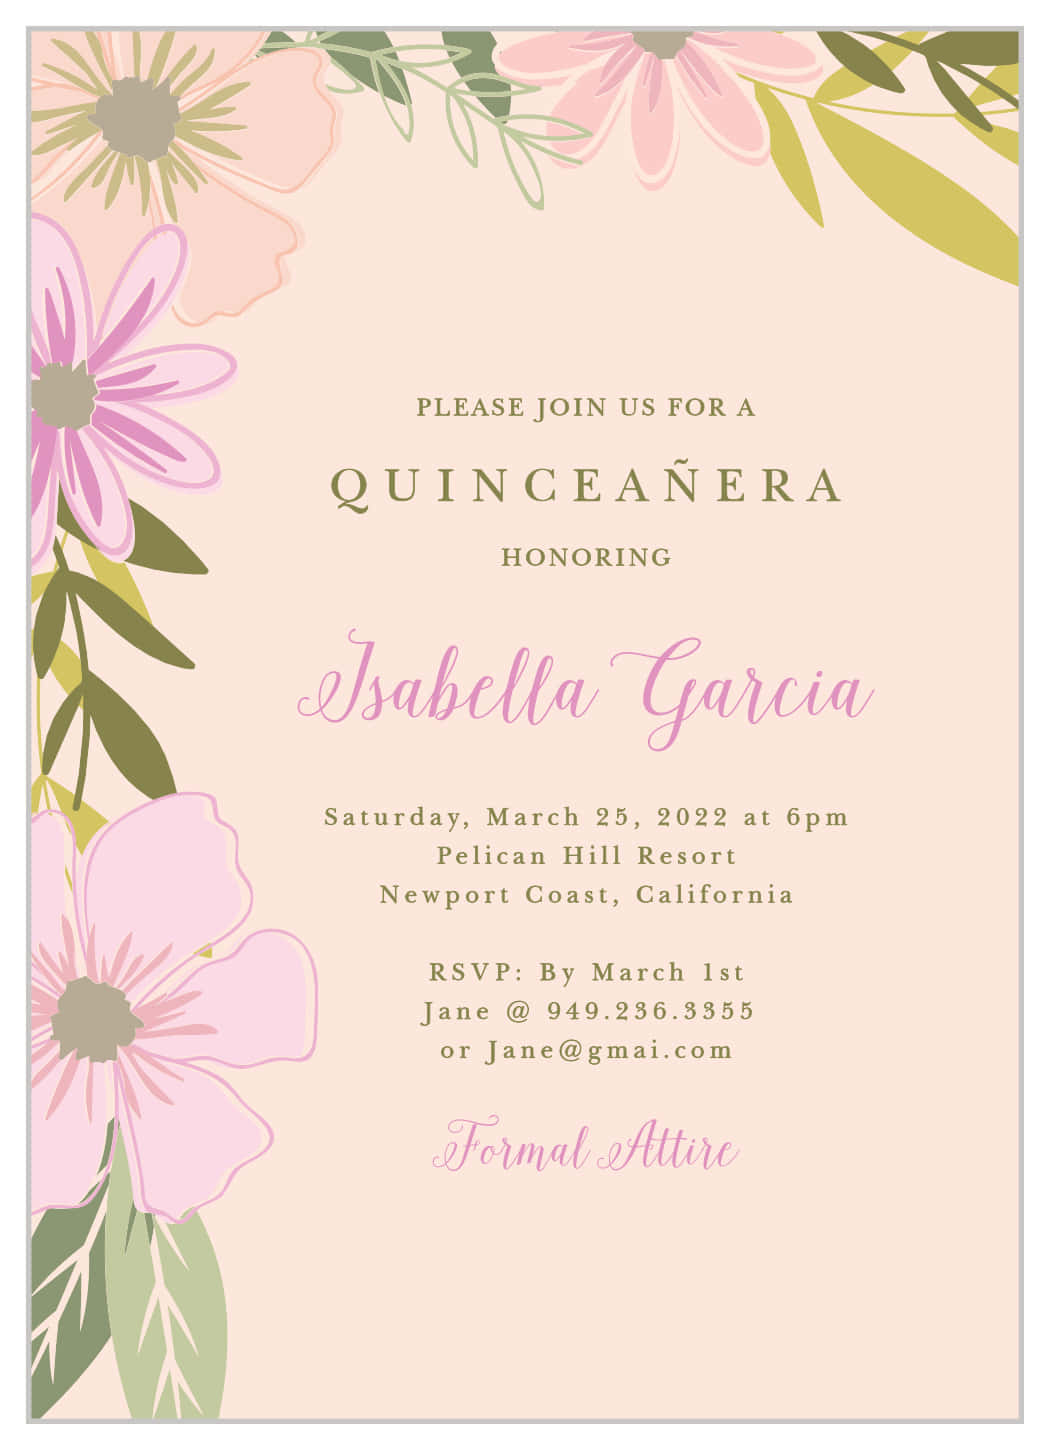 Quinceanera Invitations With Pink Flowers